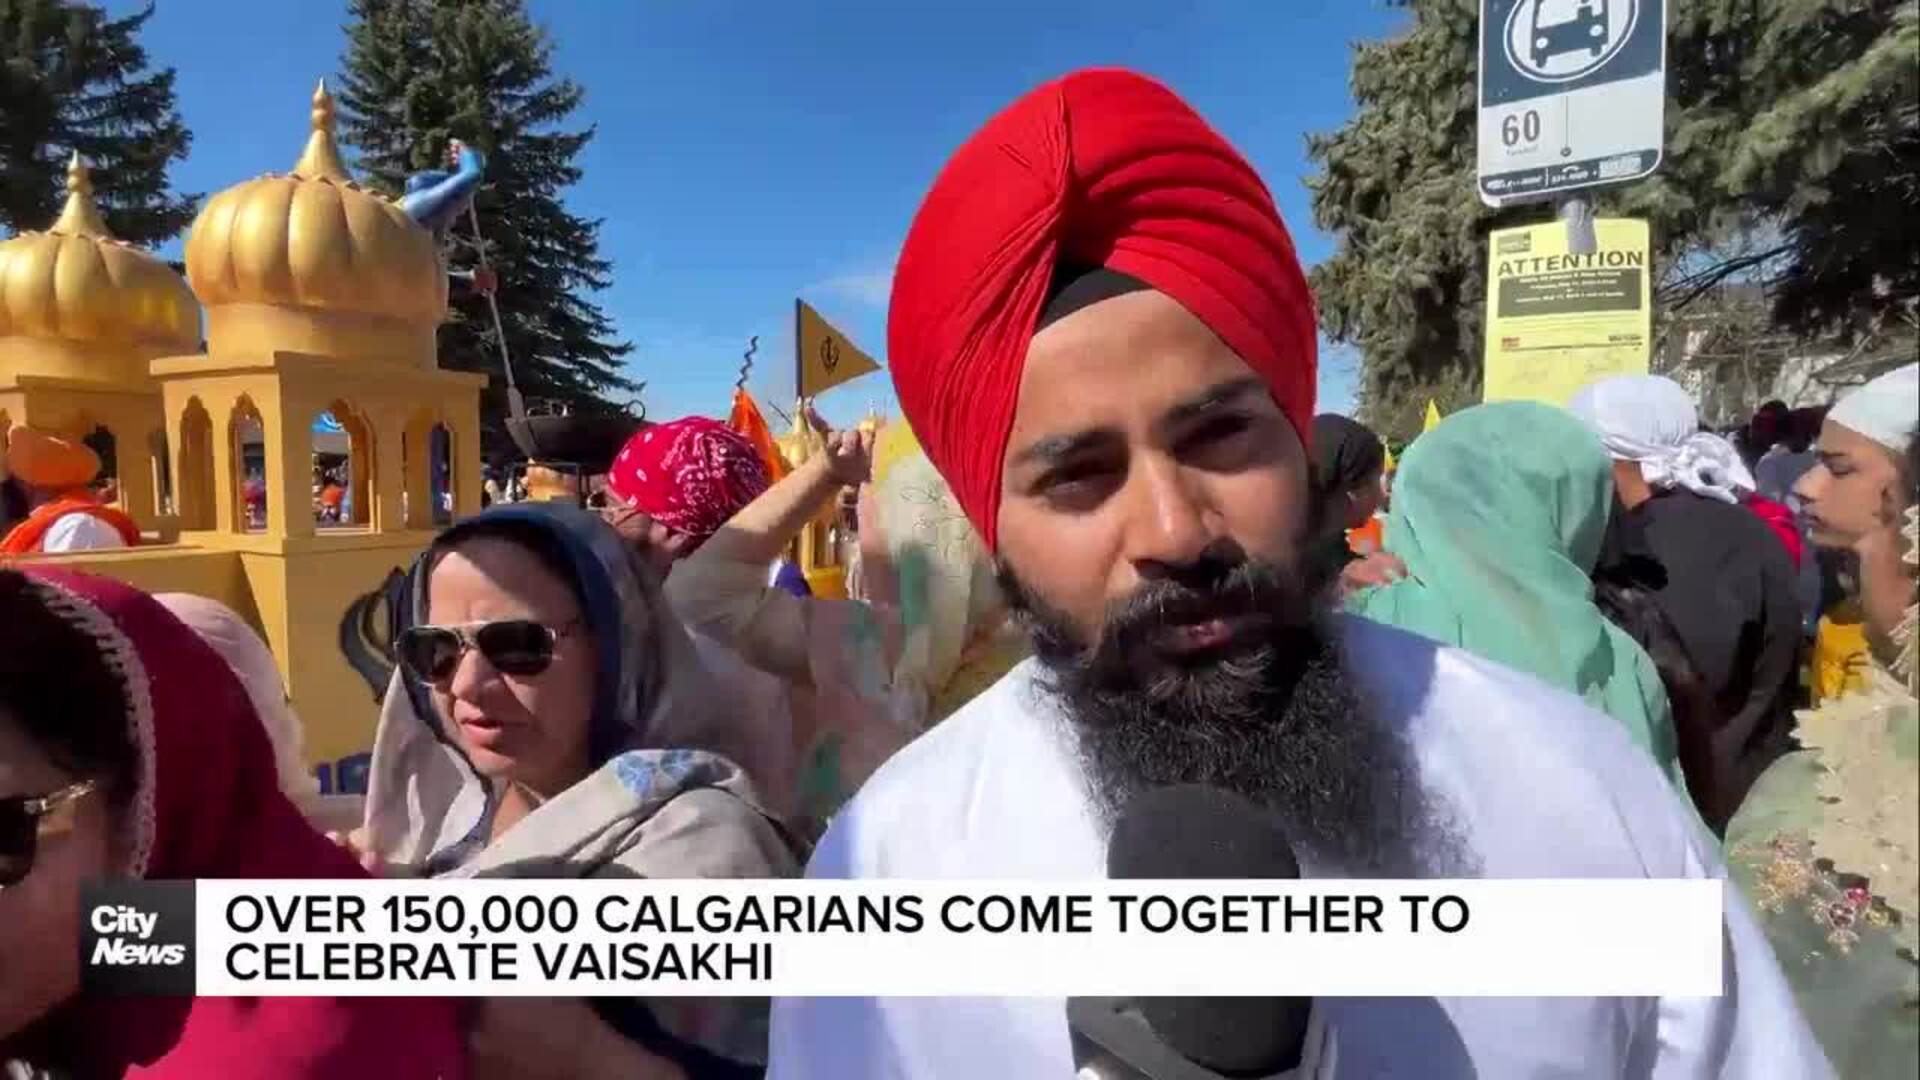 Over 150,000 Calgarians come together to celebrate Vaisakhi